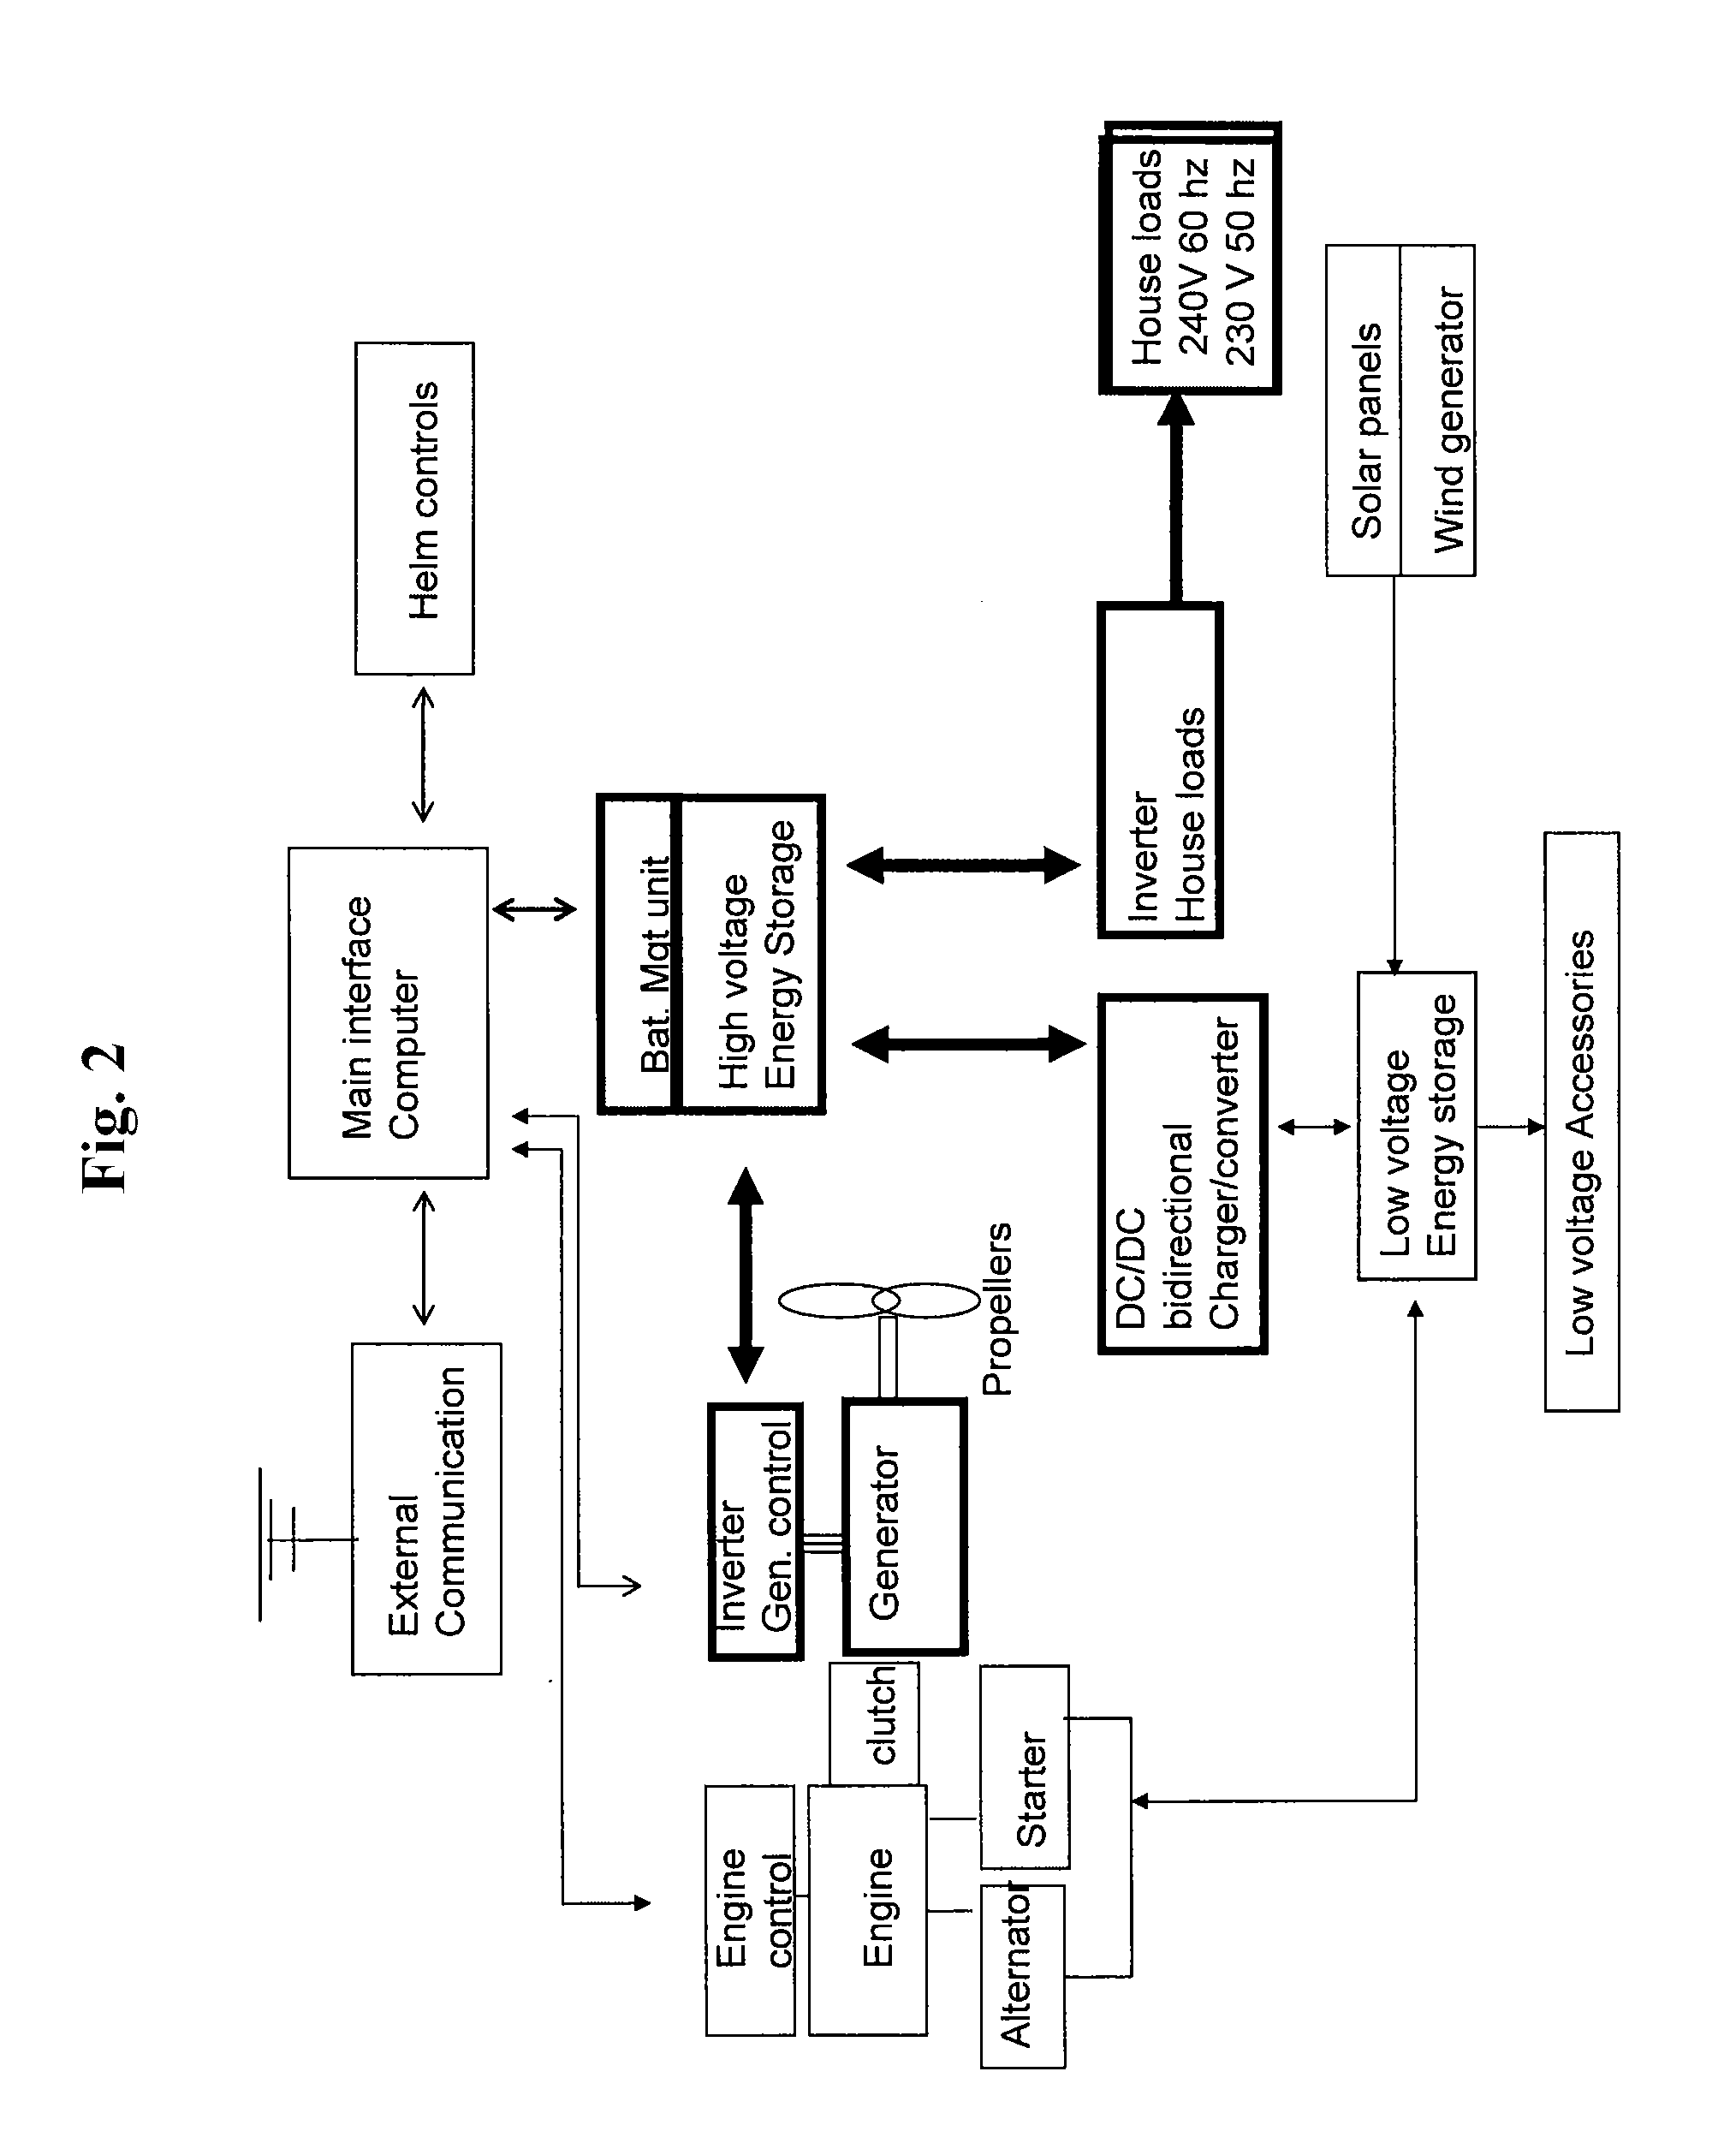 Electronic method of controlling propulsion and regeneration for electric, hybrid-electric and diesel-electric marine crafts, and an apparatus therefor